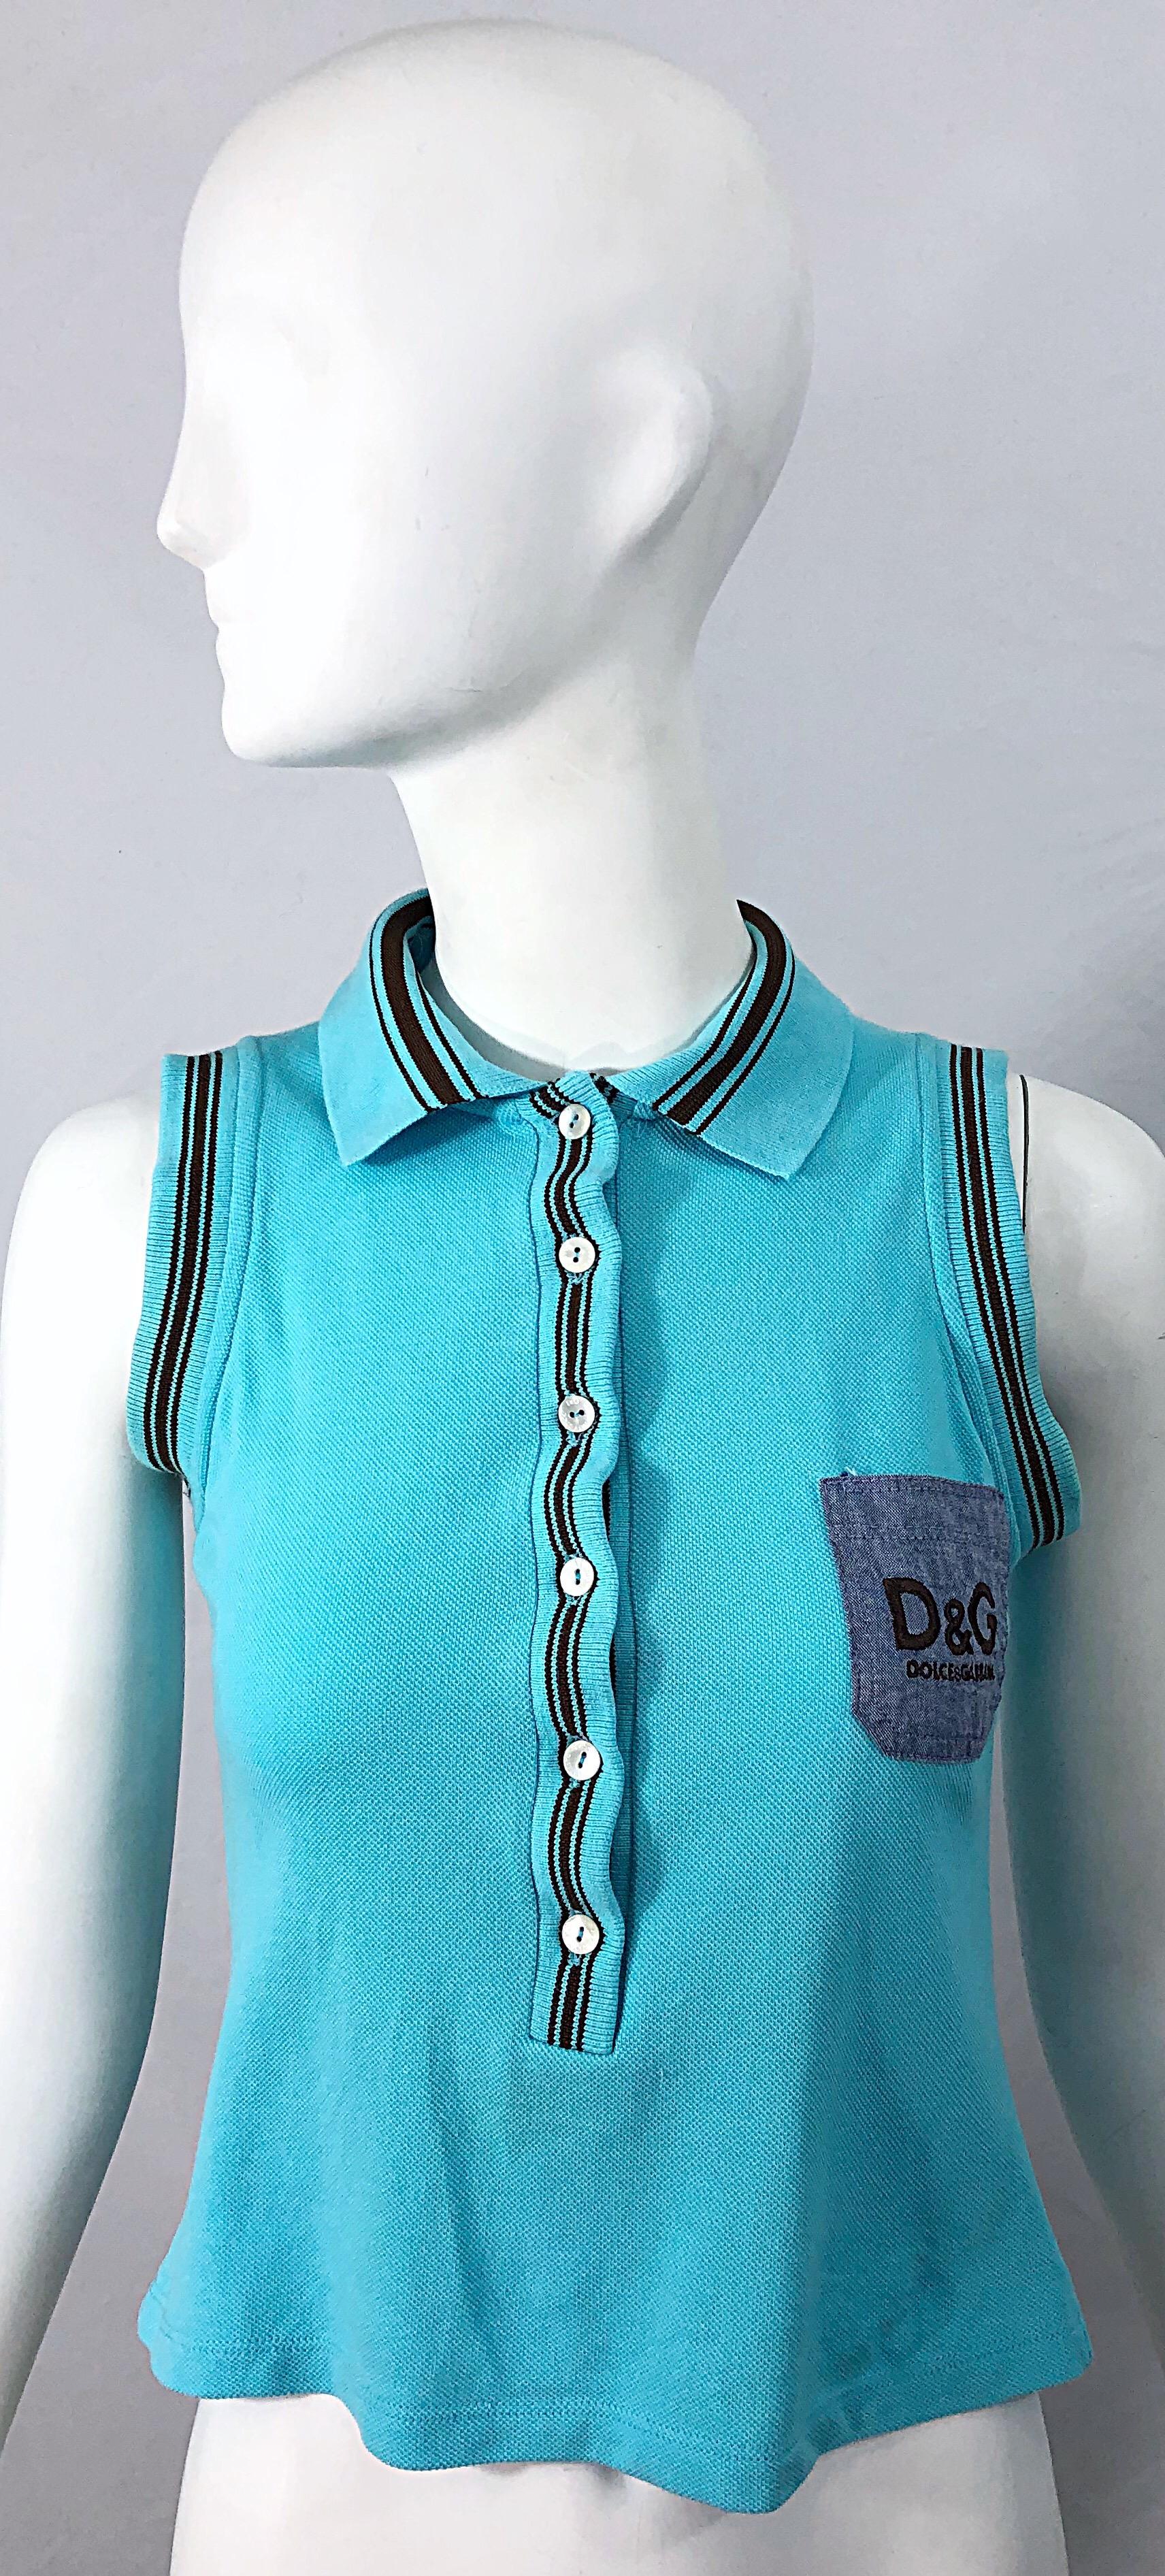 Vintage Dolce & Gabbana 1990s Turquoise Blue + Brown Logo 90s Knit Crop Top Polo For Sale 4